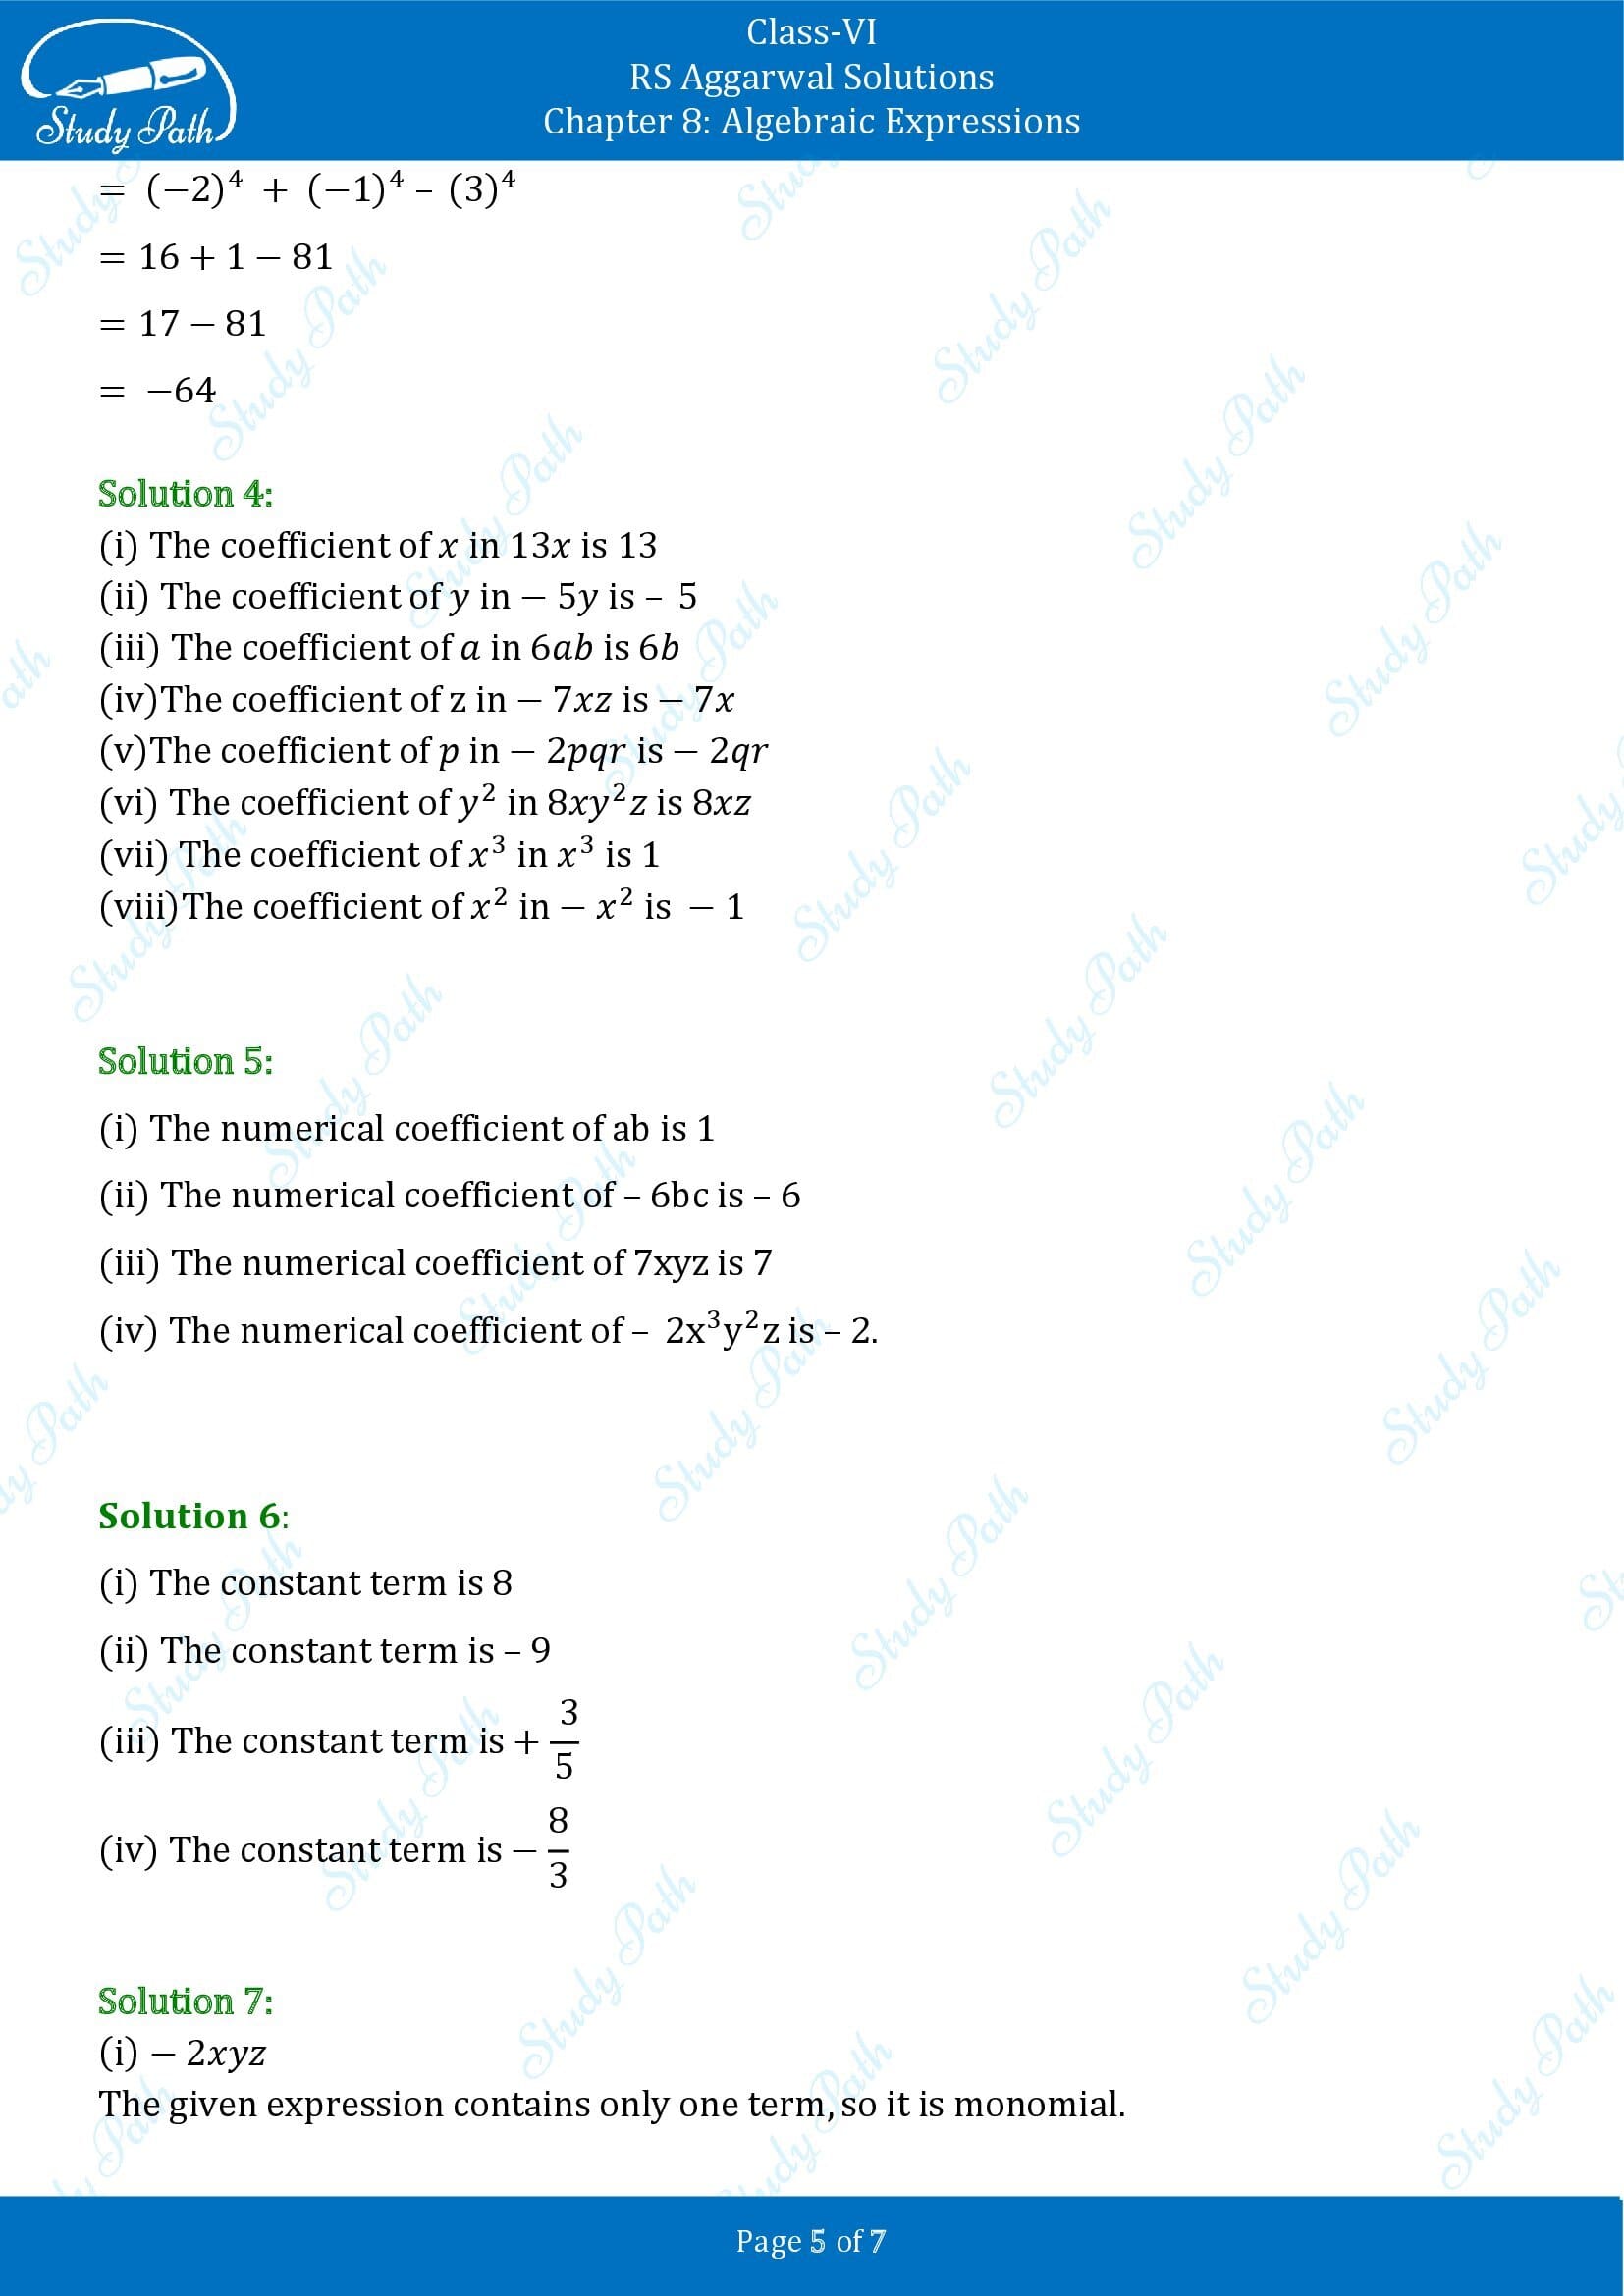 RS Aggarwal Solutions Class 6 Chapter 8 Algebraic Expressions Exercise 8B 0005